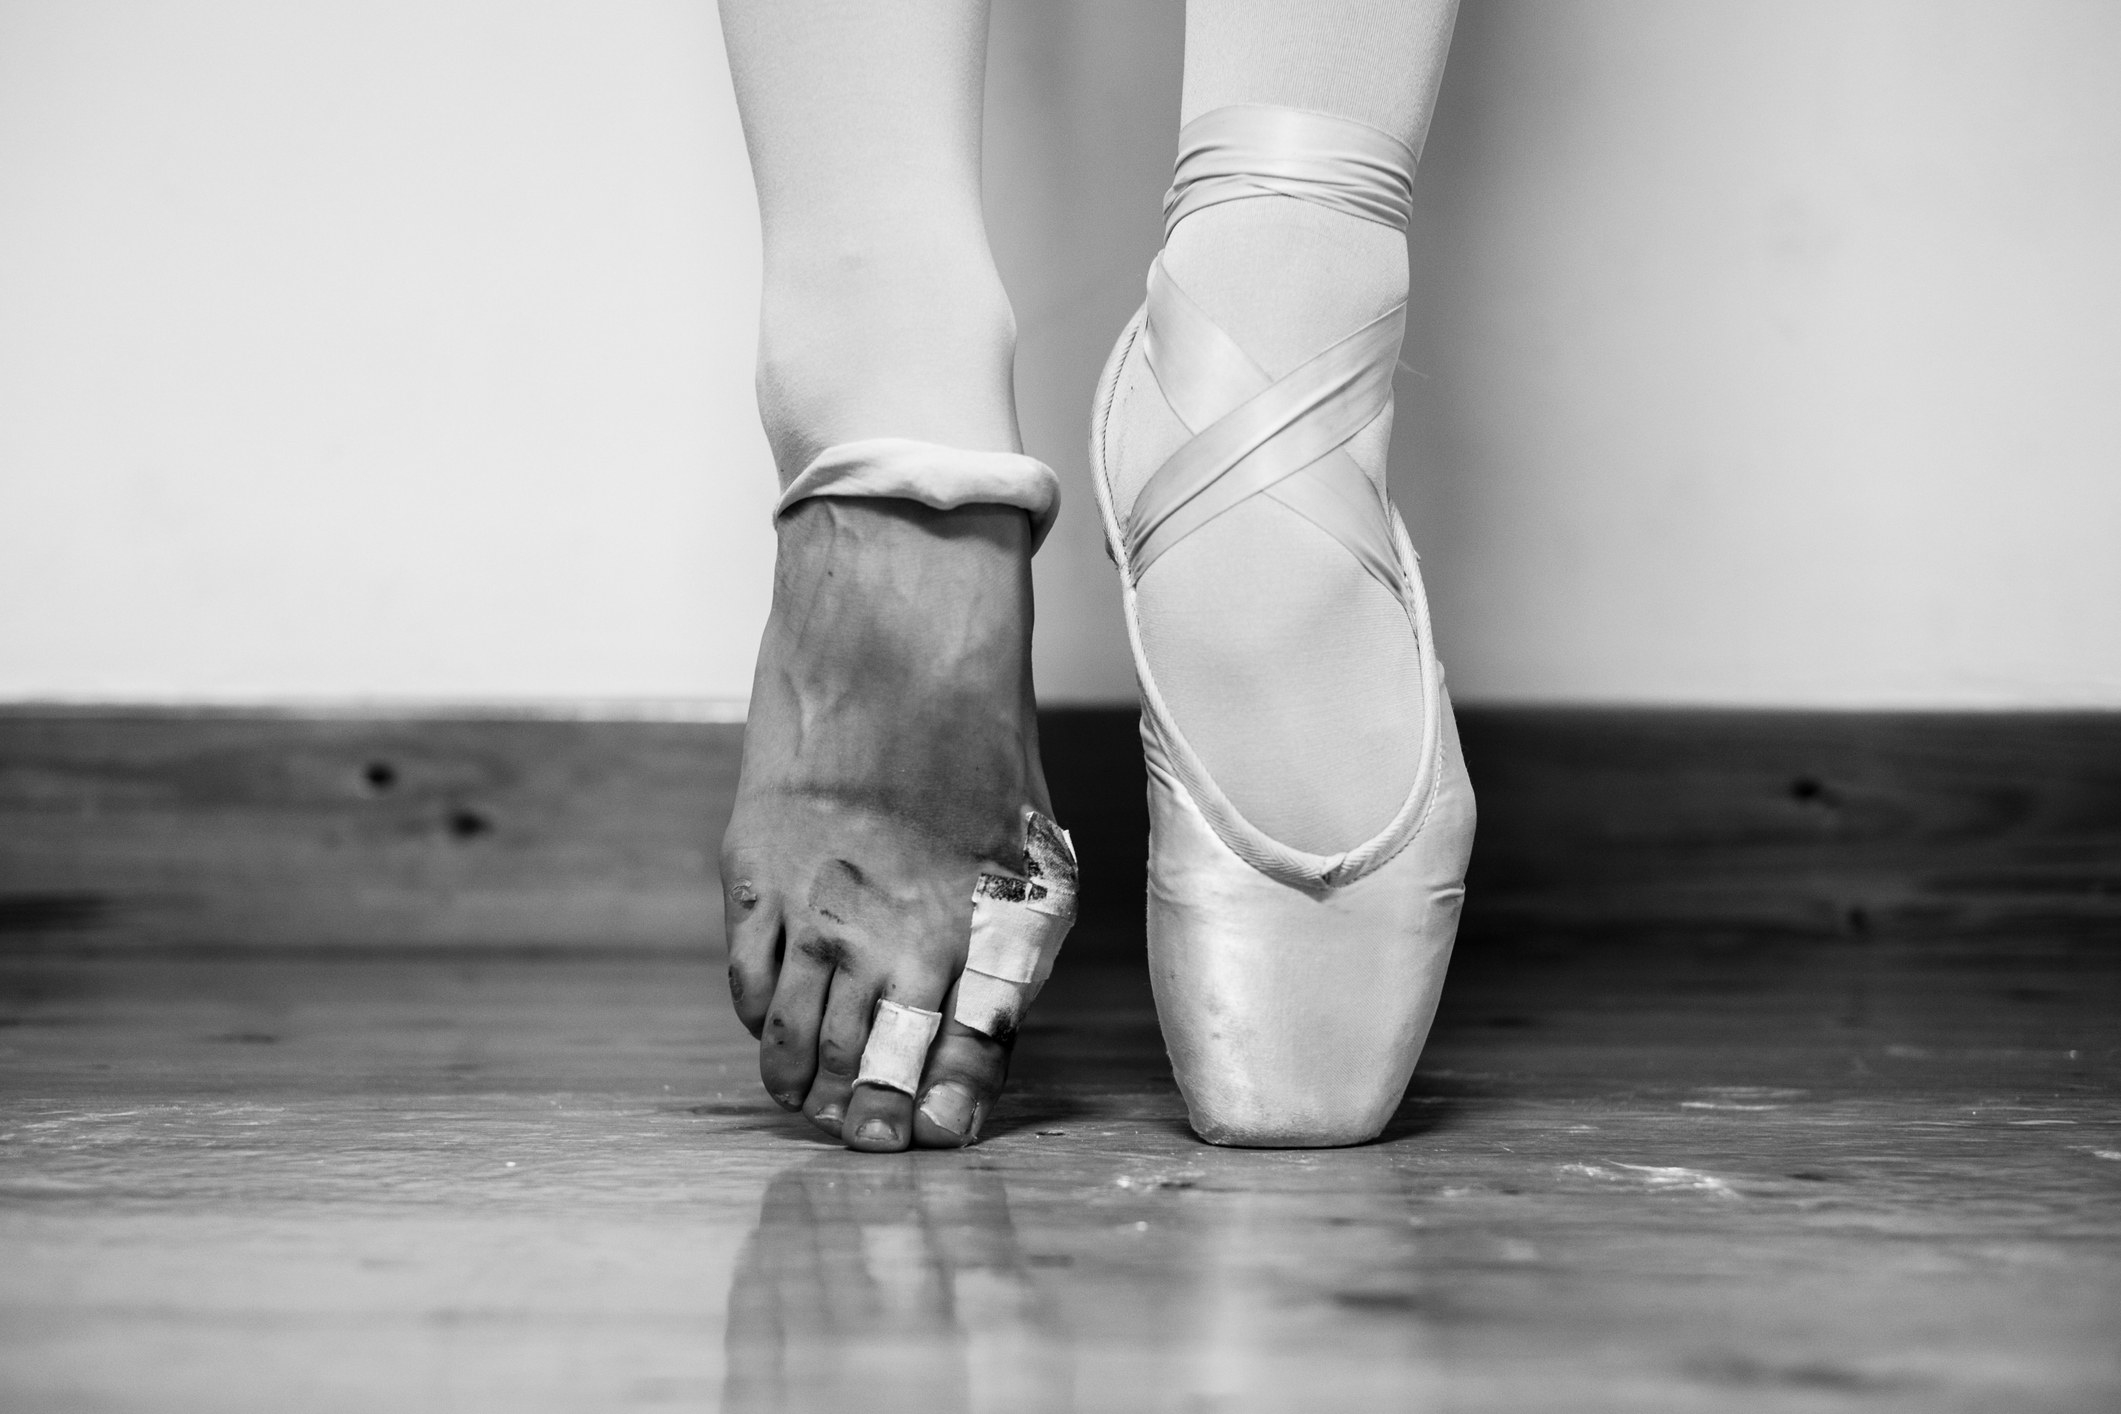 Ballerina stood with one pointe shoe on and one bare foot showing it wrapped up due to blisters.